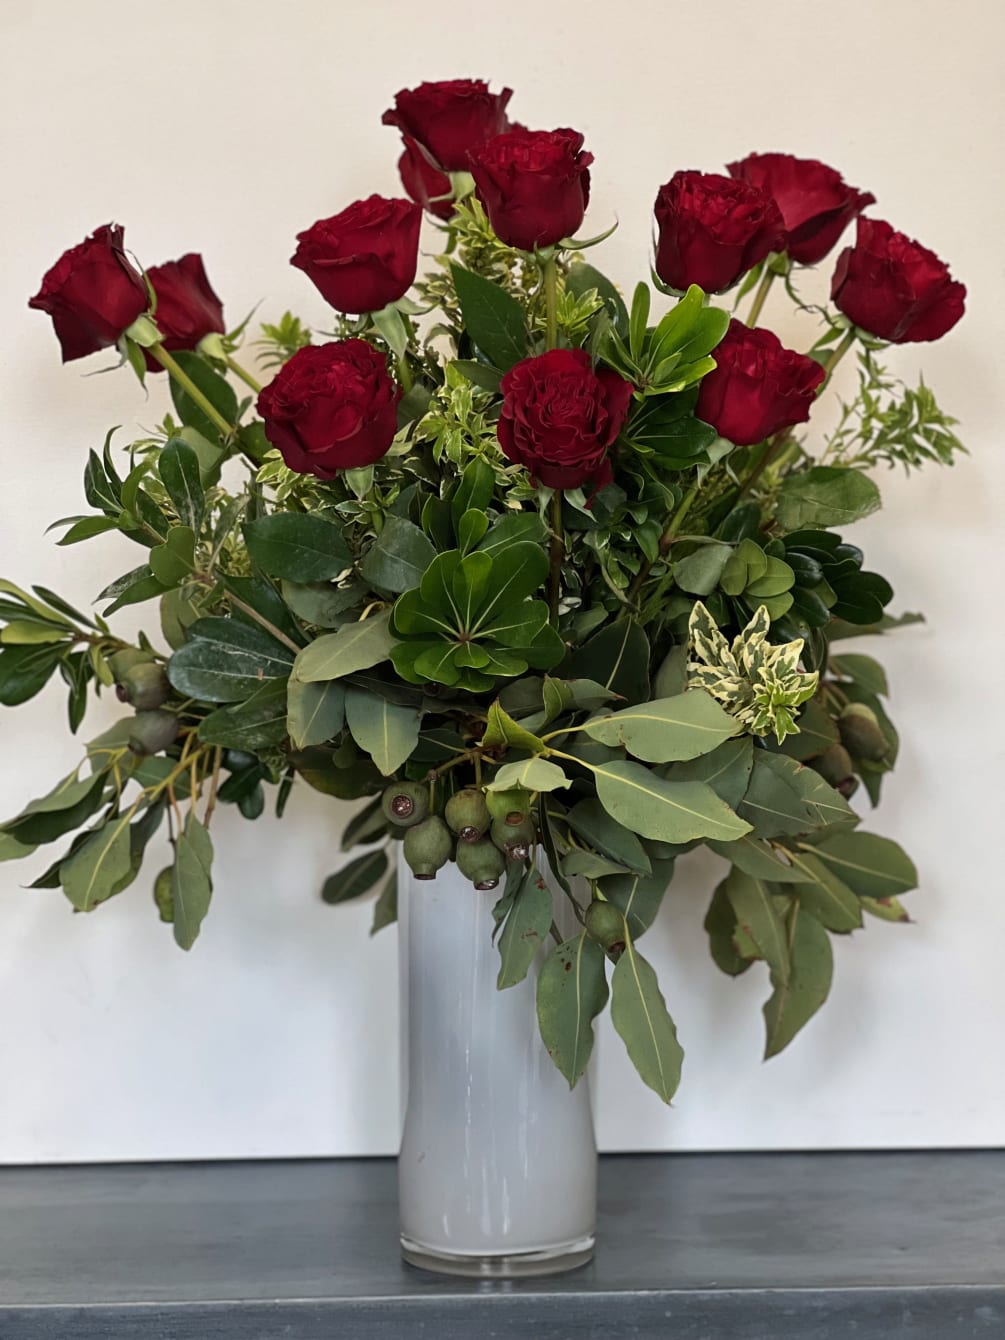 The traditional go-to arrangements, our dozen red roses come accented with lush